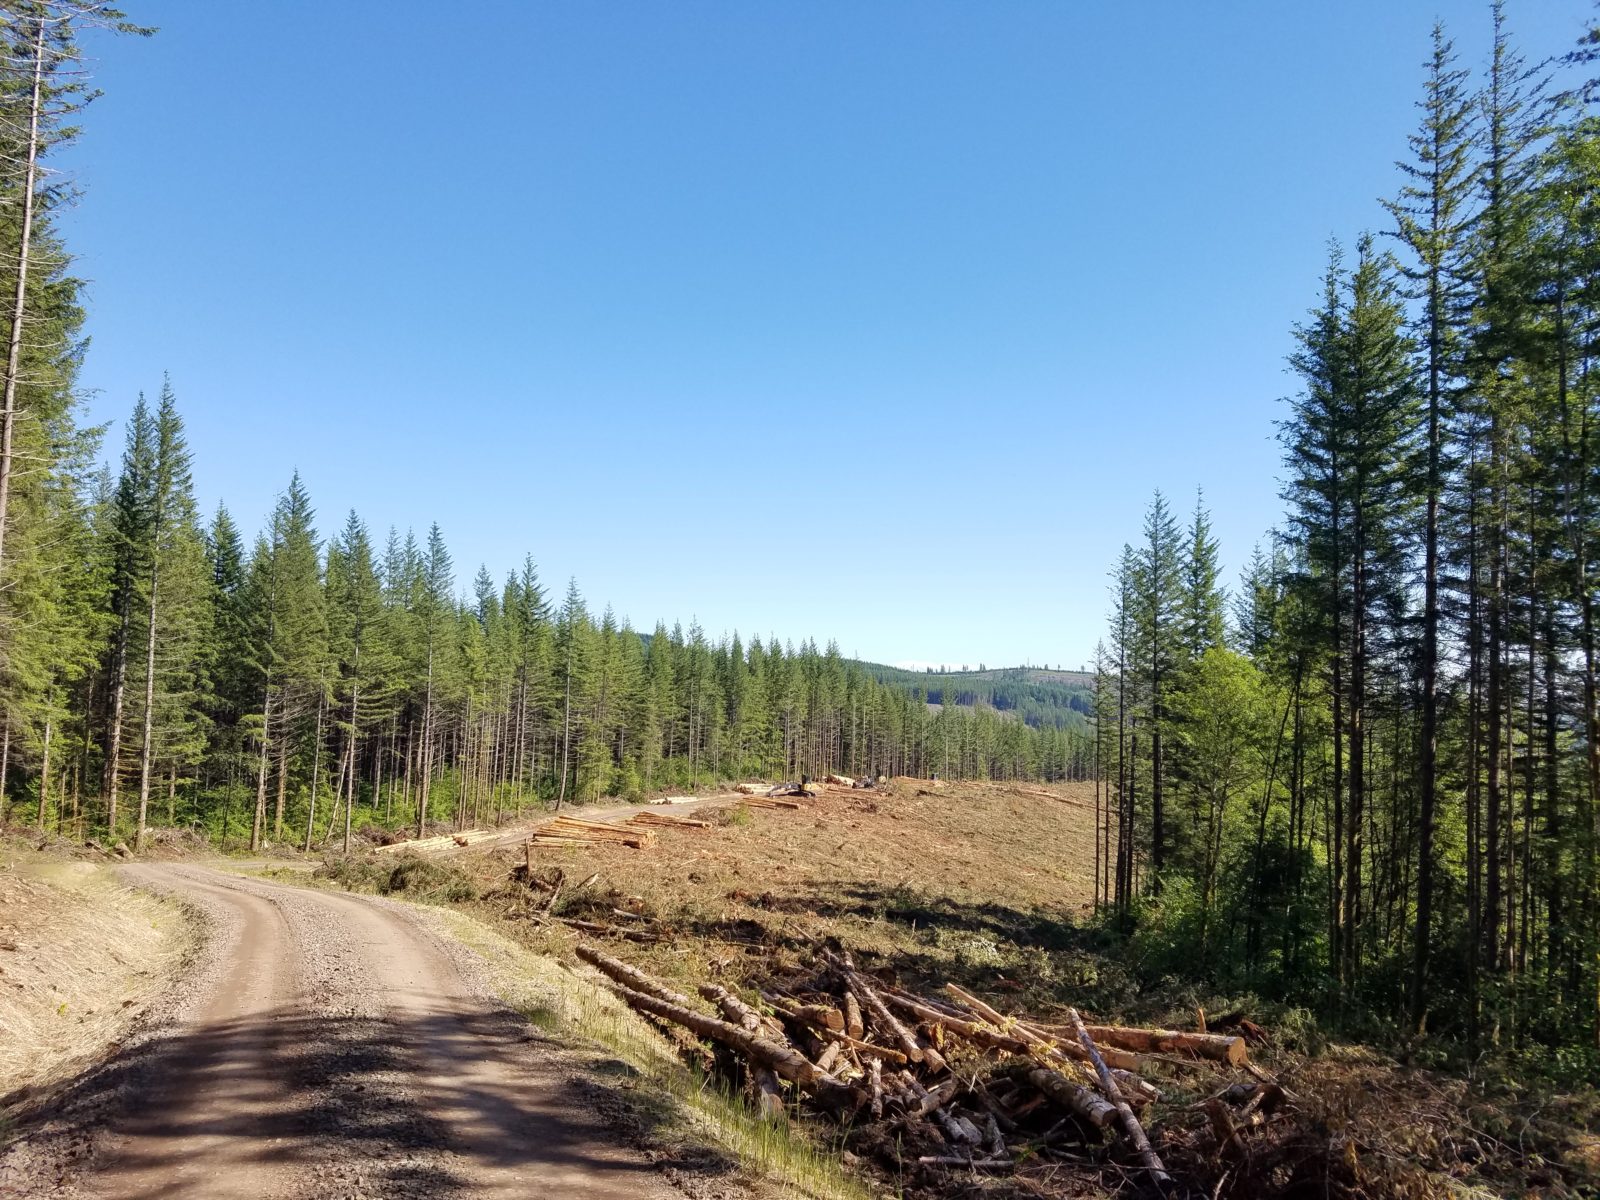 watersheds, City of Camas, Boulder Creek, Jones Creek, sustainable forest management, forest engineering, Vancouver, forest access roads, timber sale